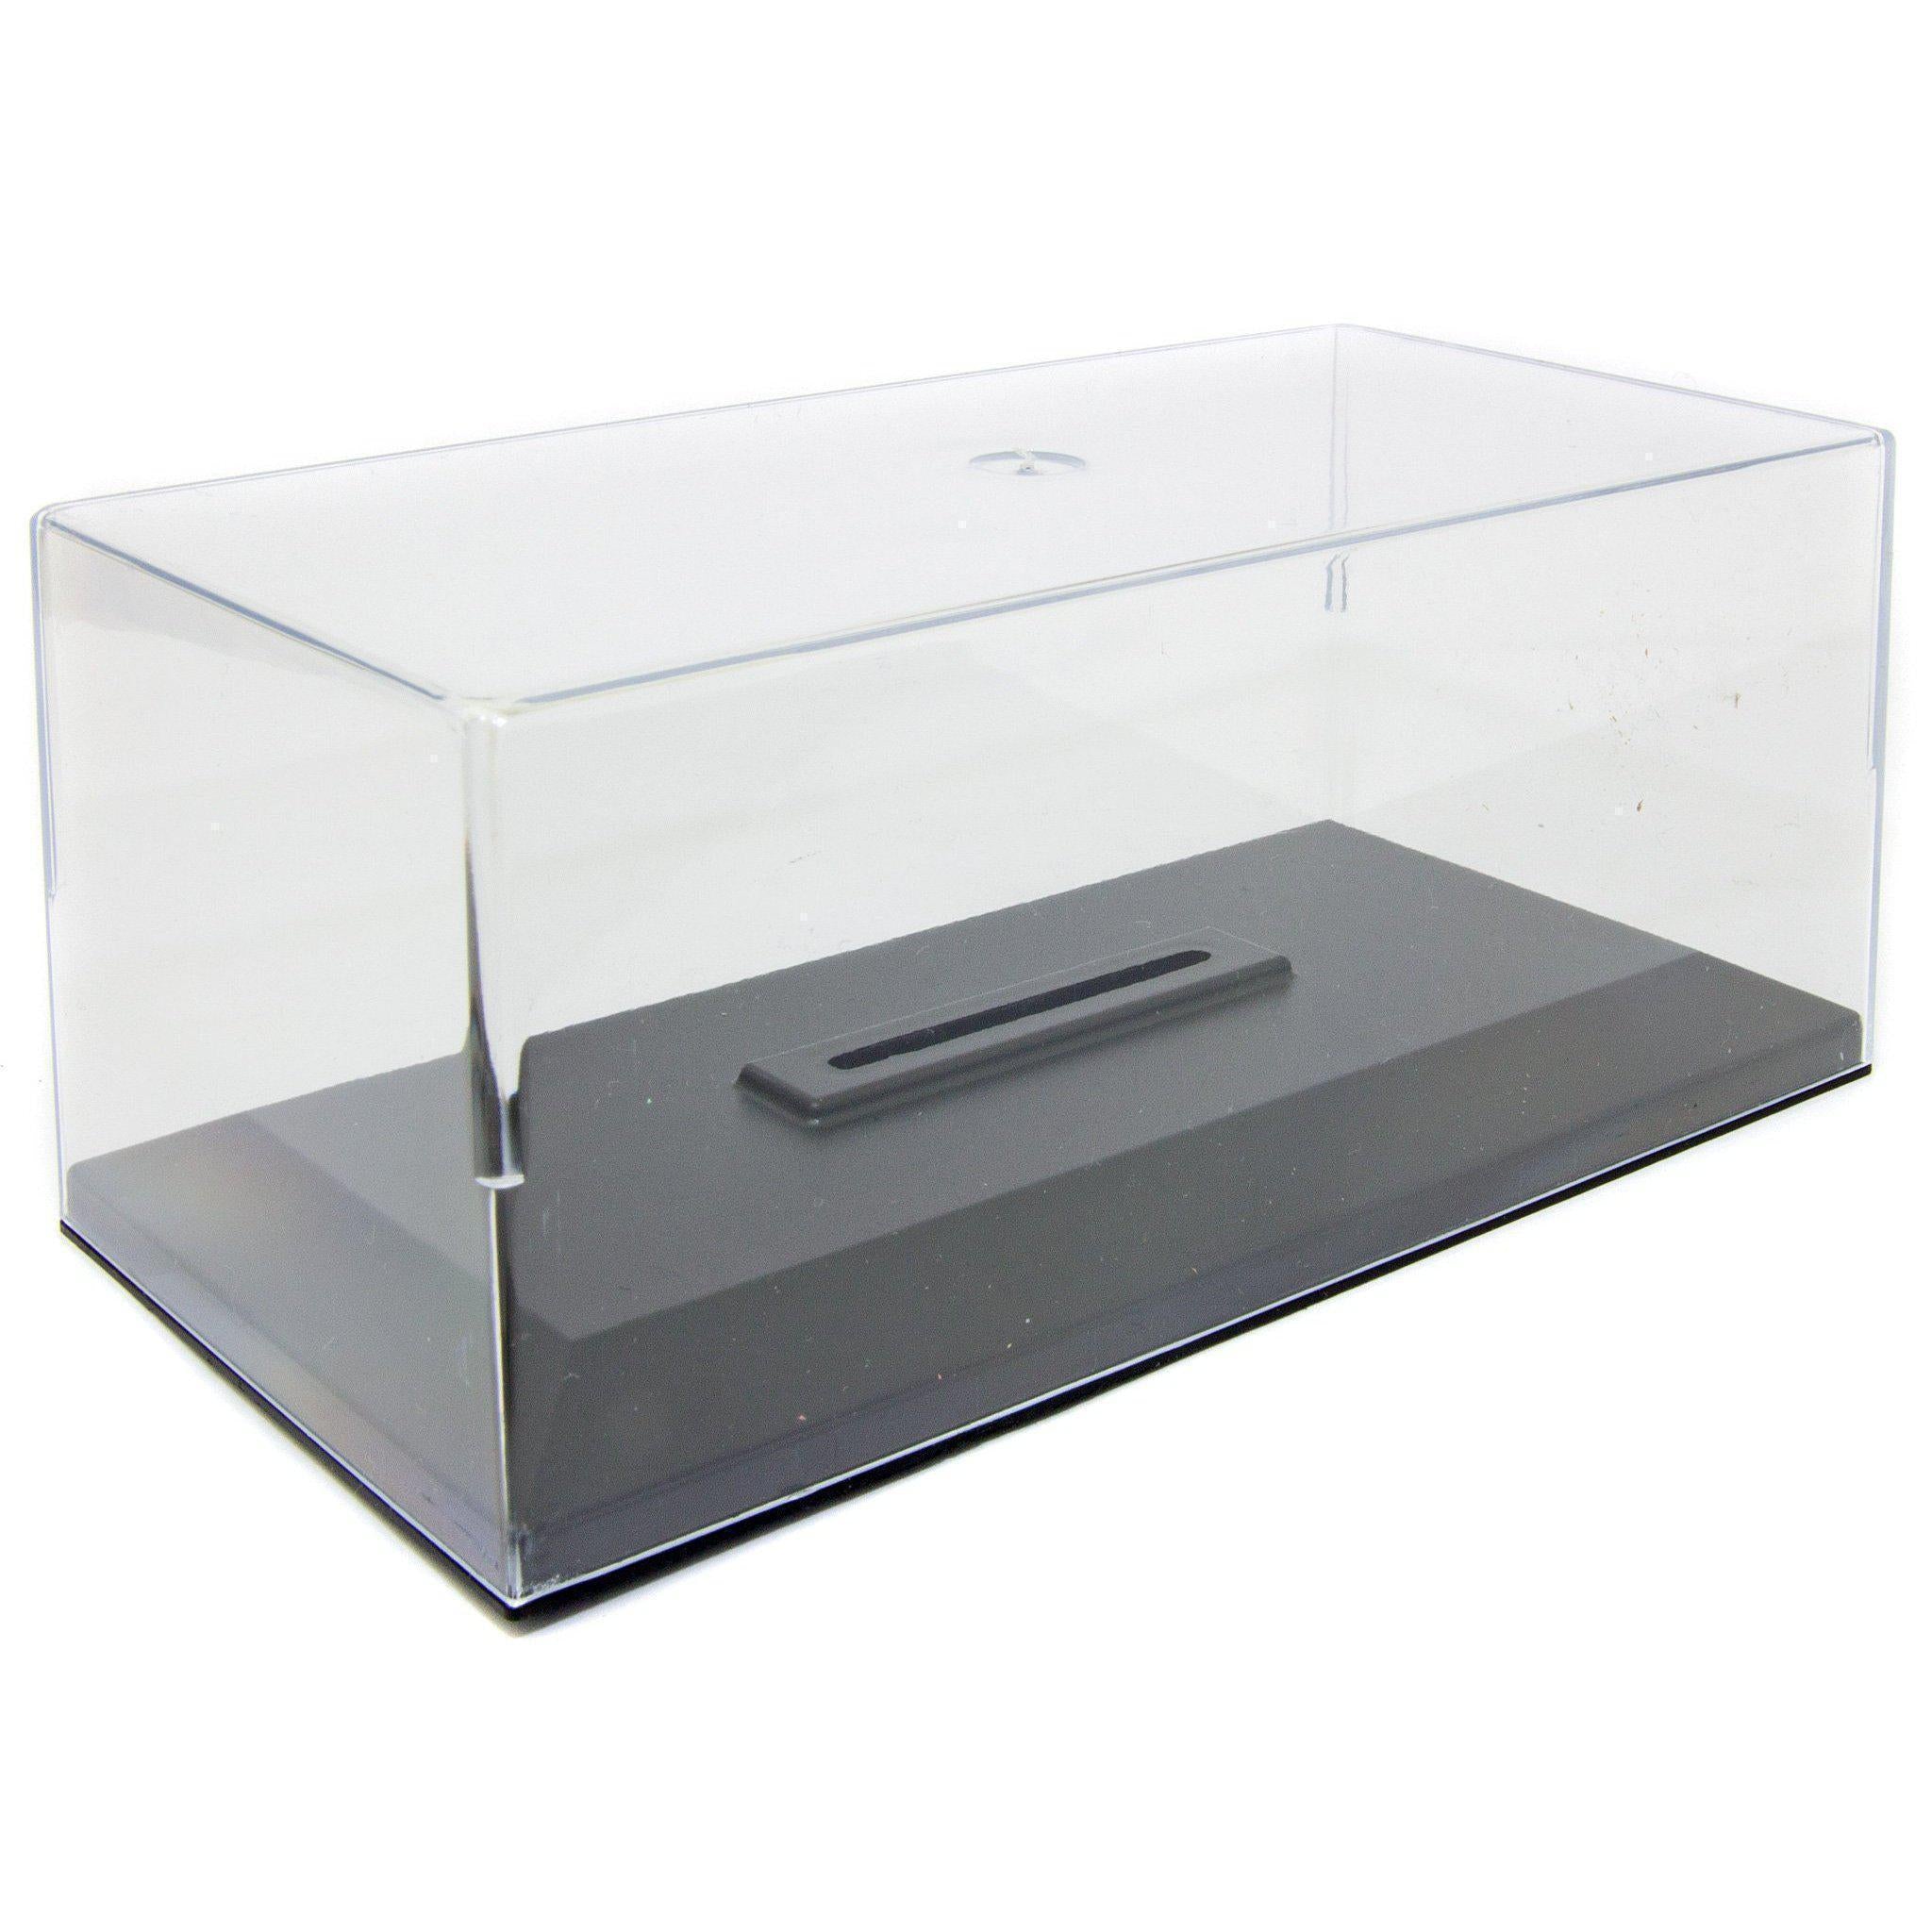 Display Case for Model Cars - 1:43 scale-Diecast Model Centre-Diecast Model Centre